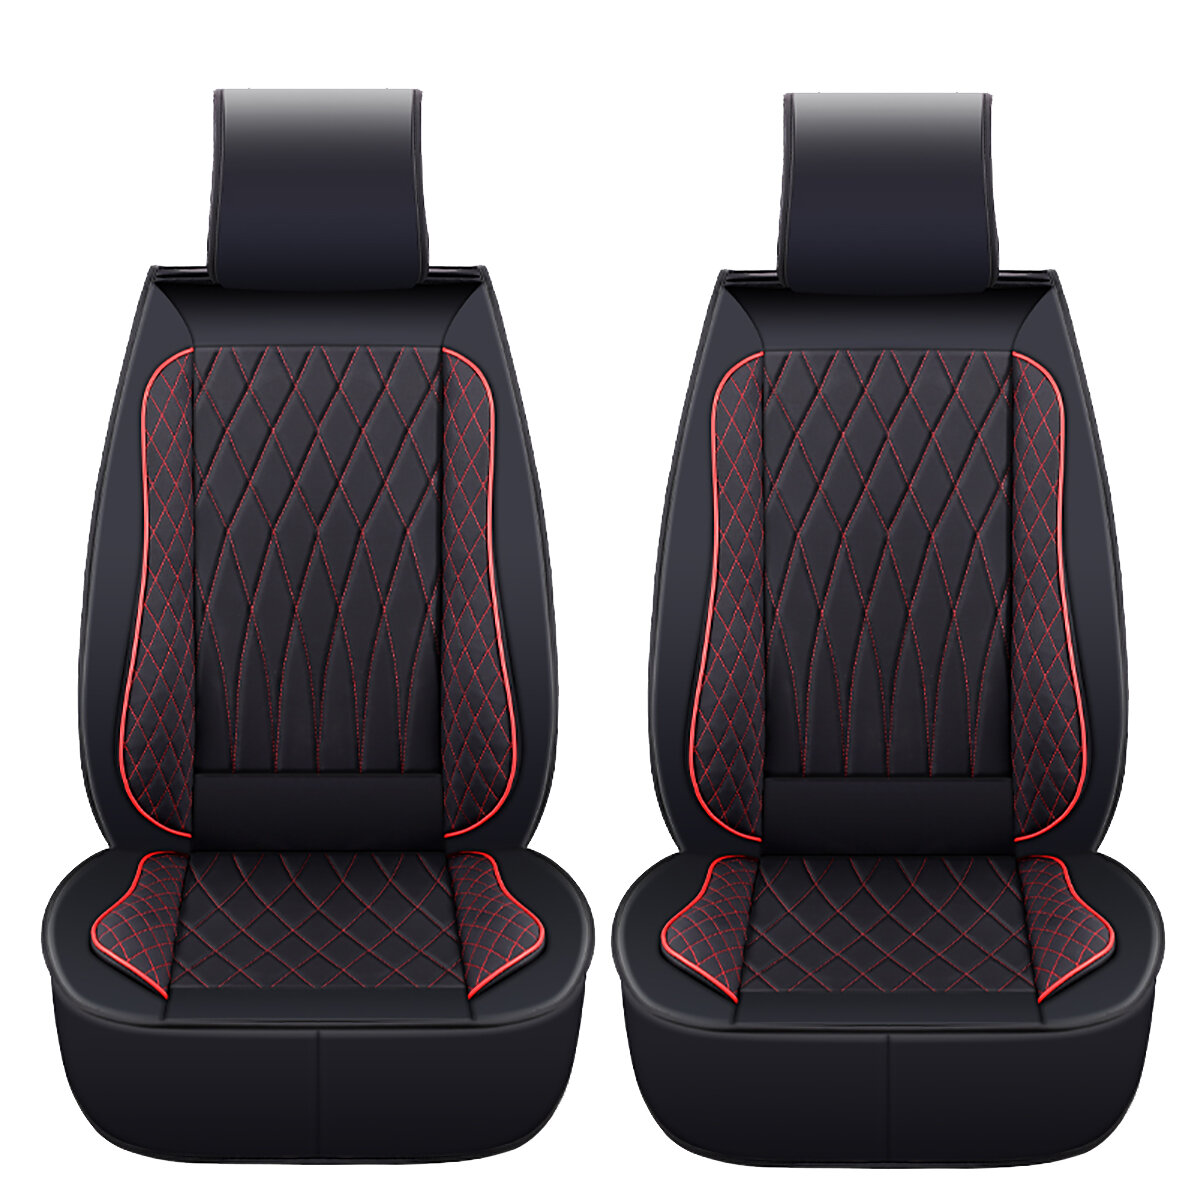 AMZ F150 Front Row Seat Covers - Premium MaterialLuxurious FeelCompatible with 09-22 Models.